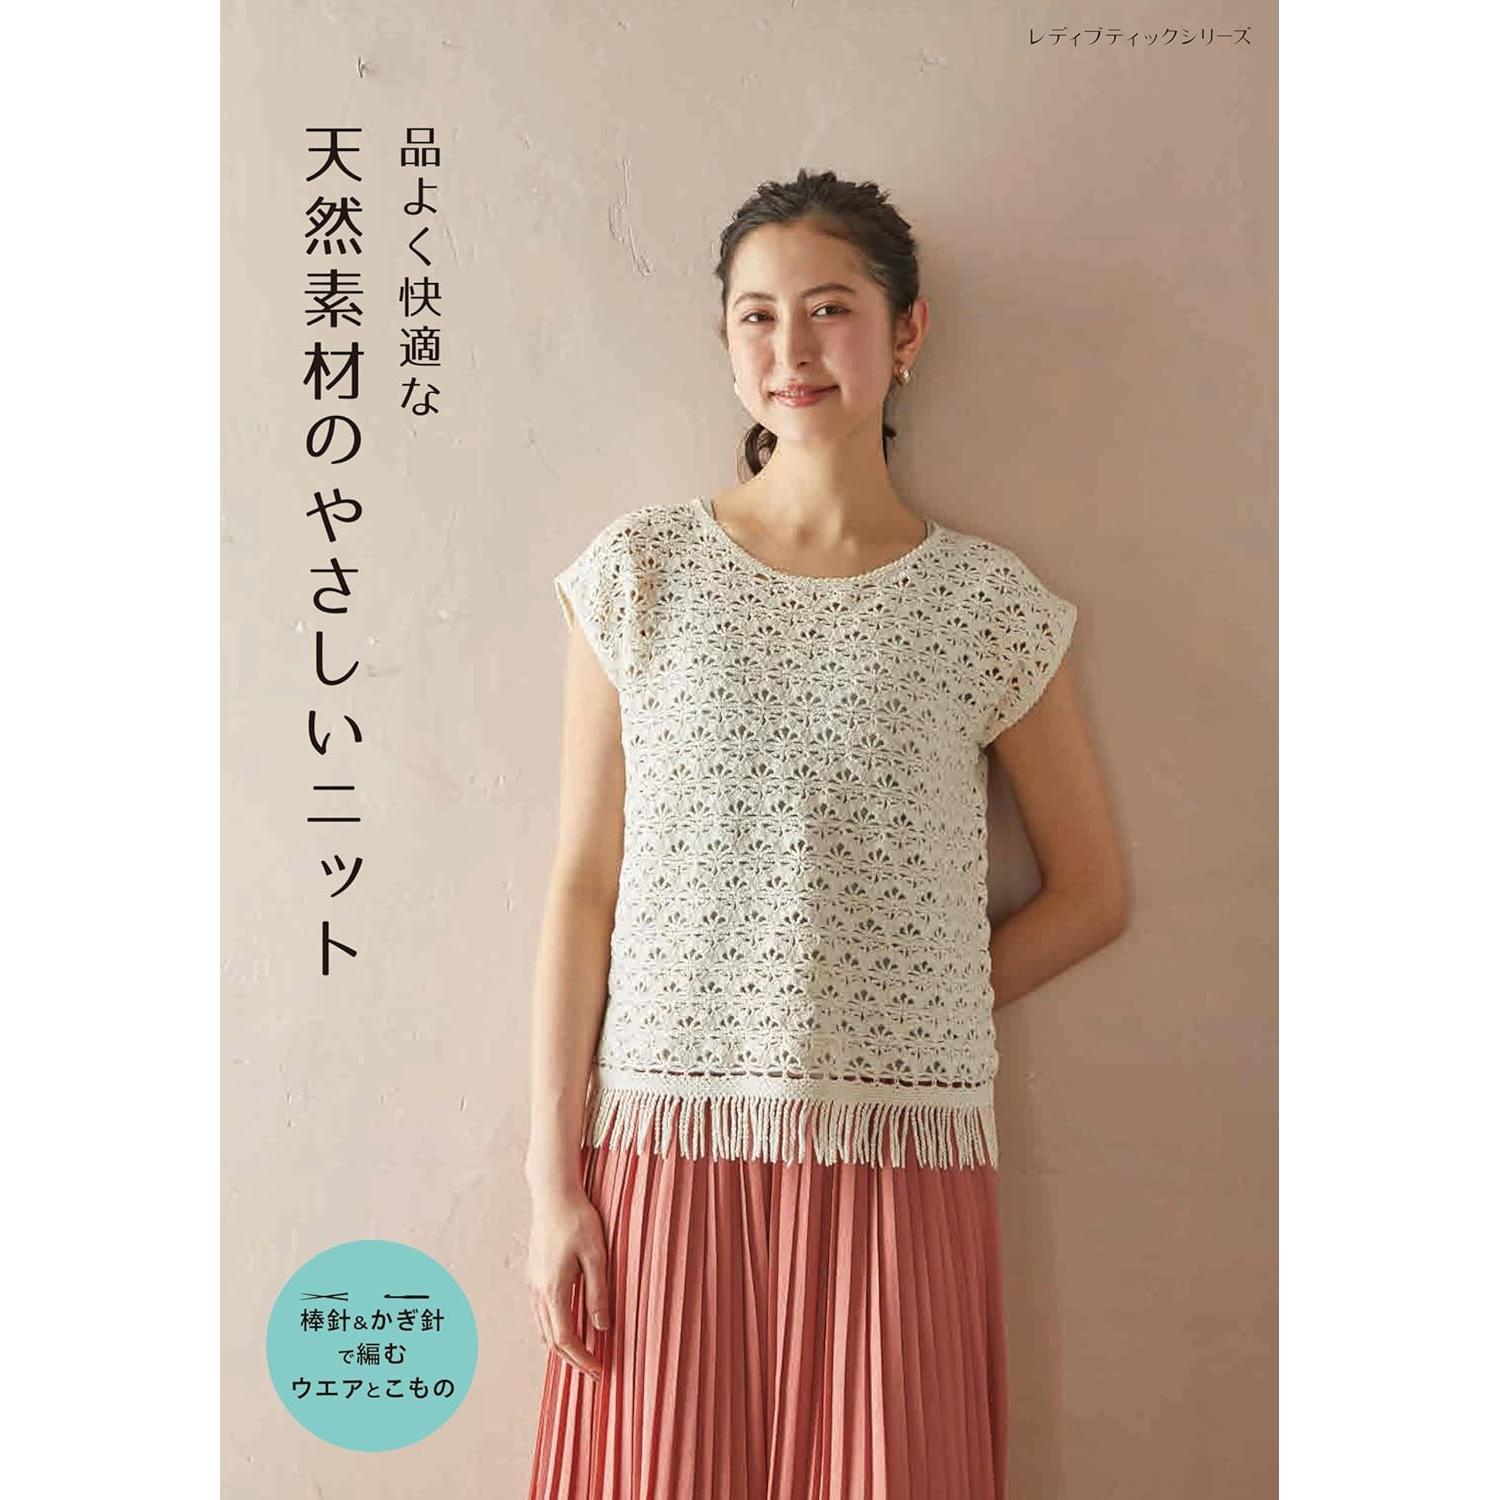 S8502 Gentle knitwear made of natural materials(book)